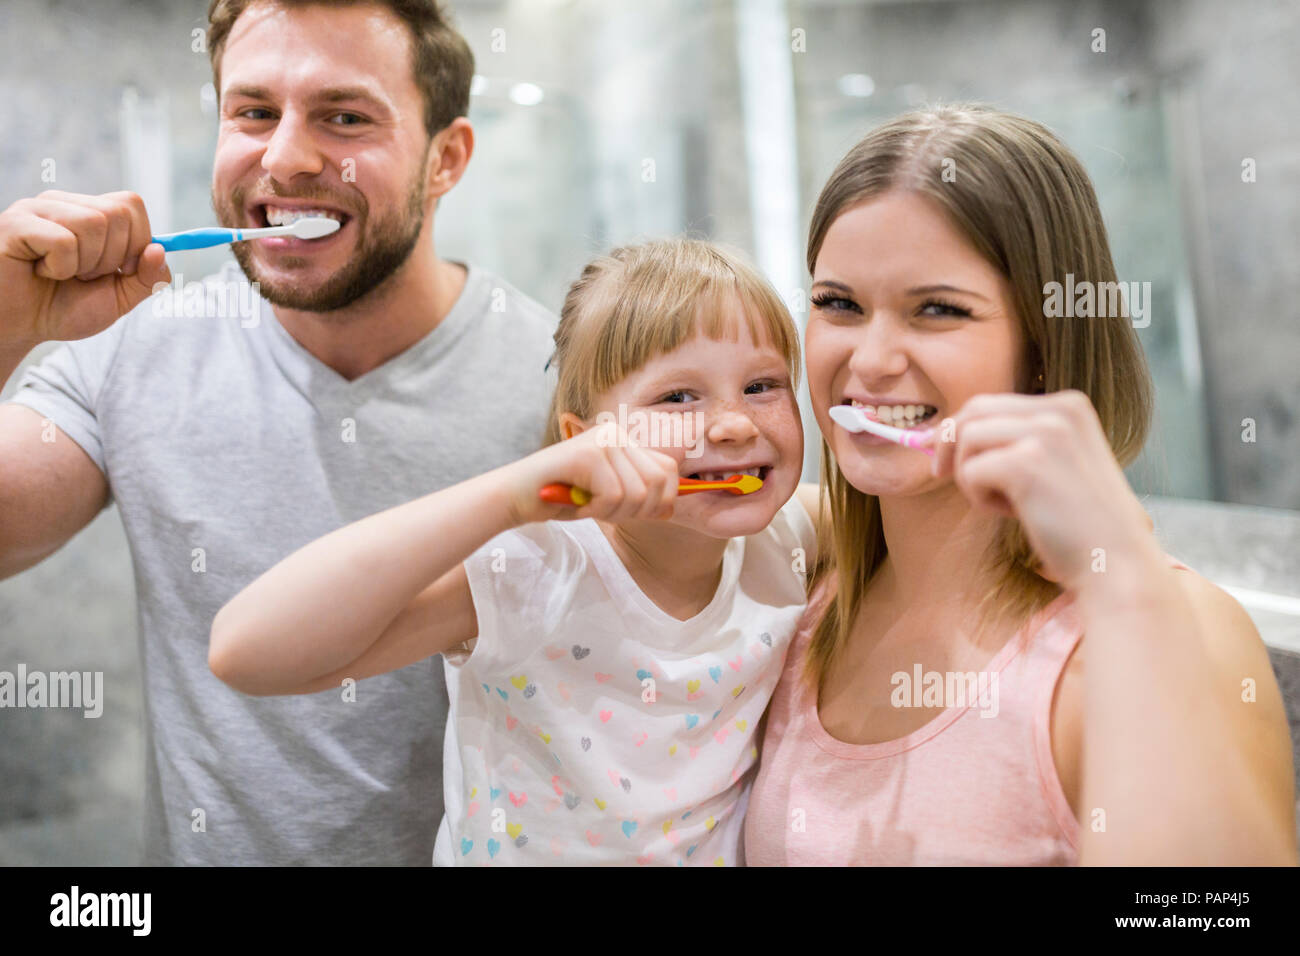 Happy family brushing teeth together Stock Photo